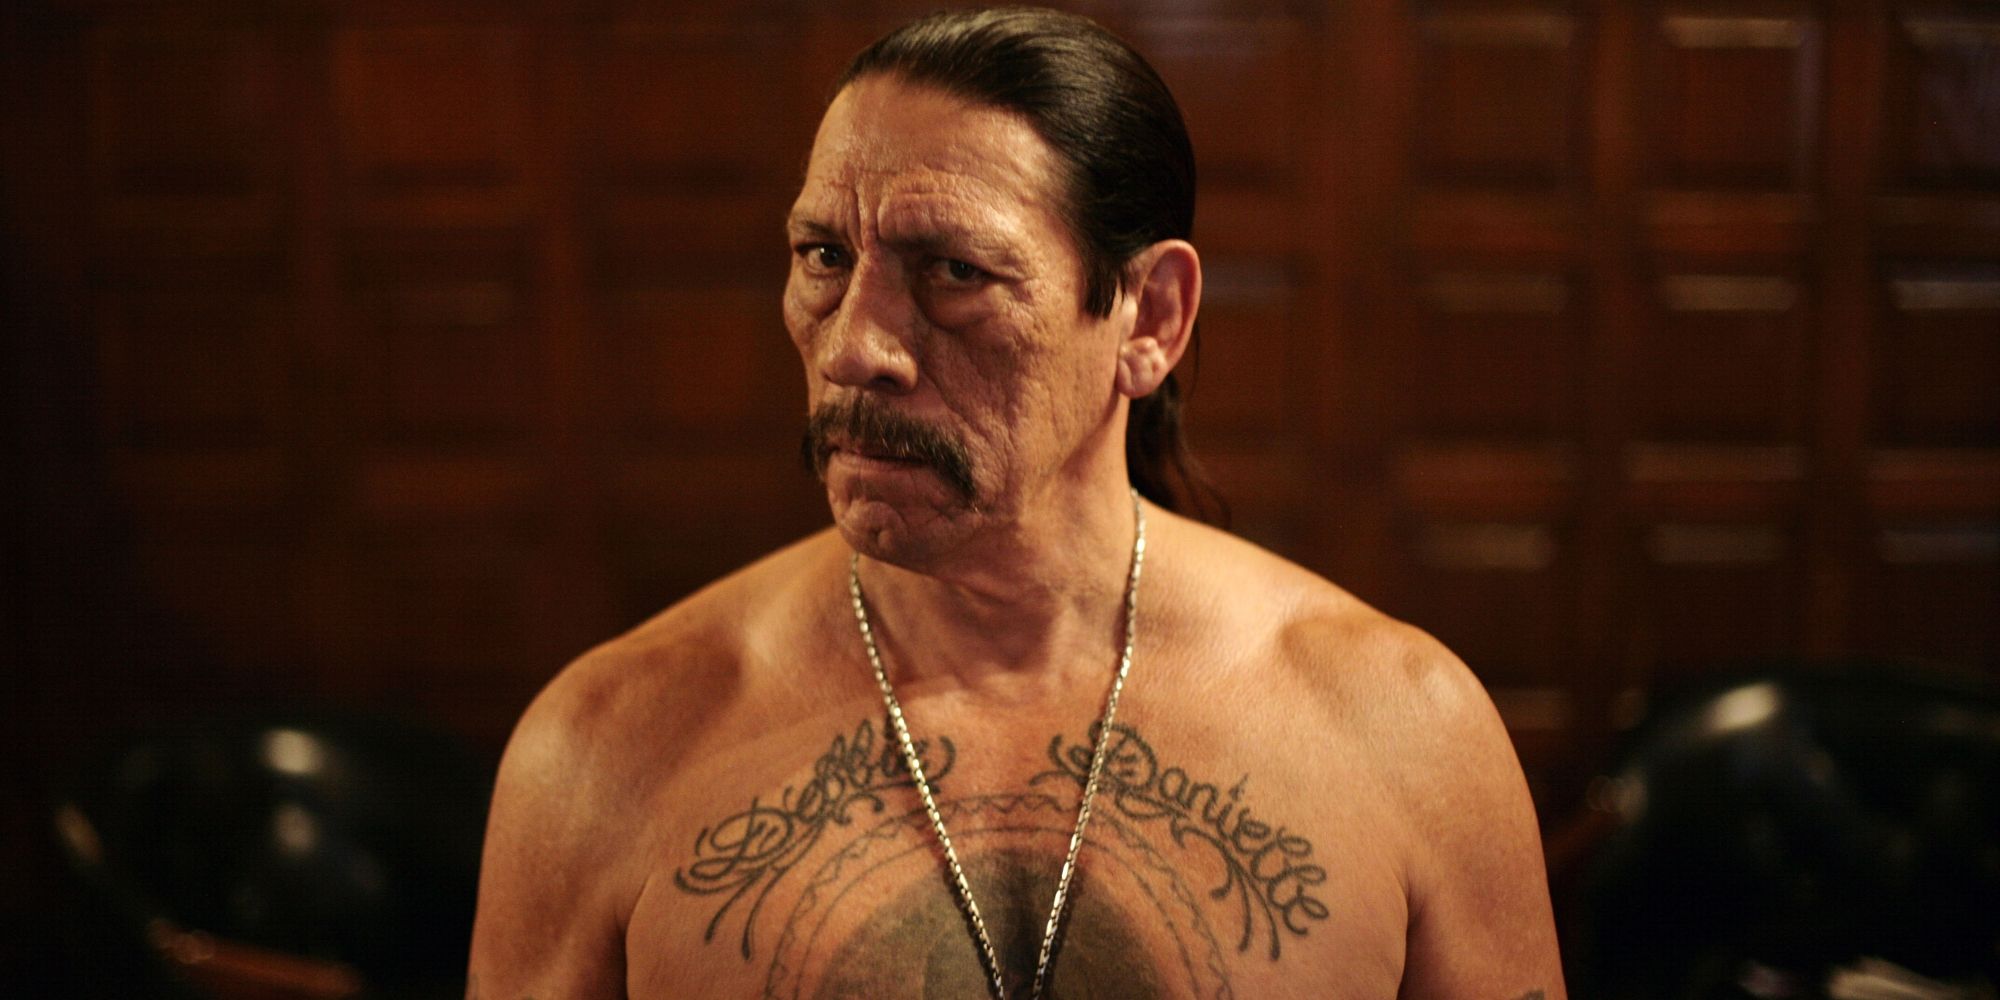 Danny Trejo is one of the most known Hollywood 